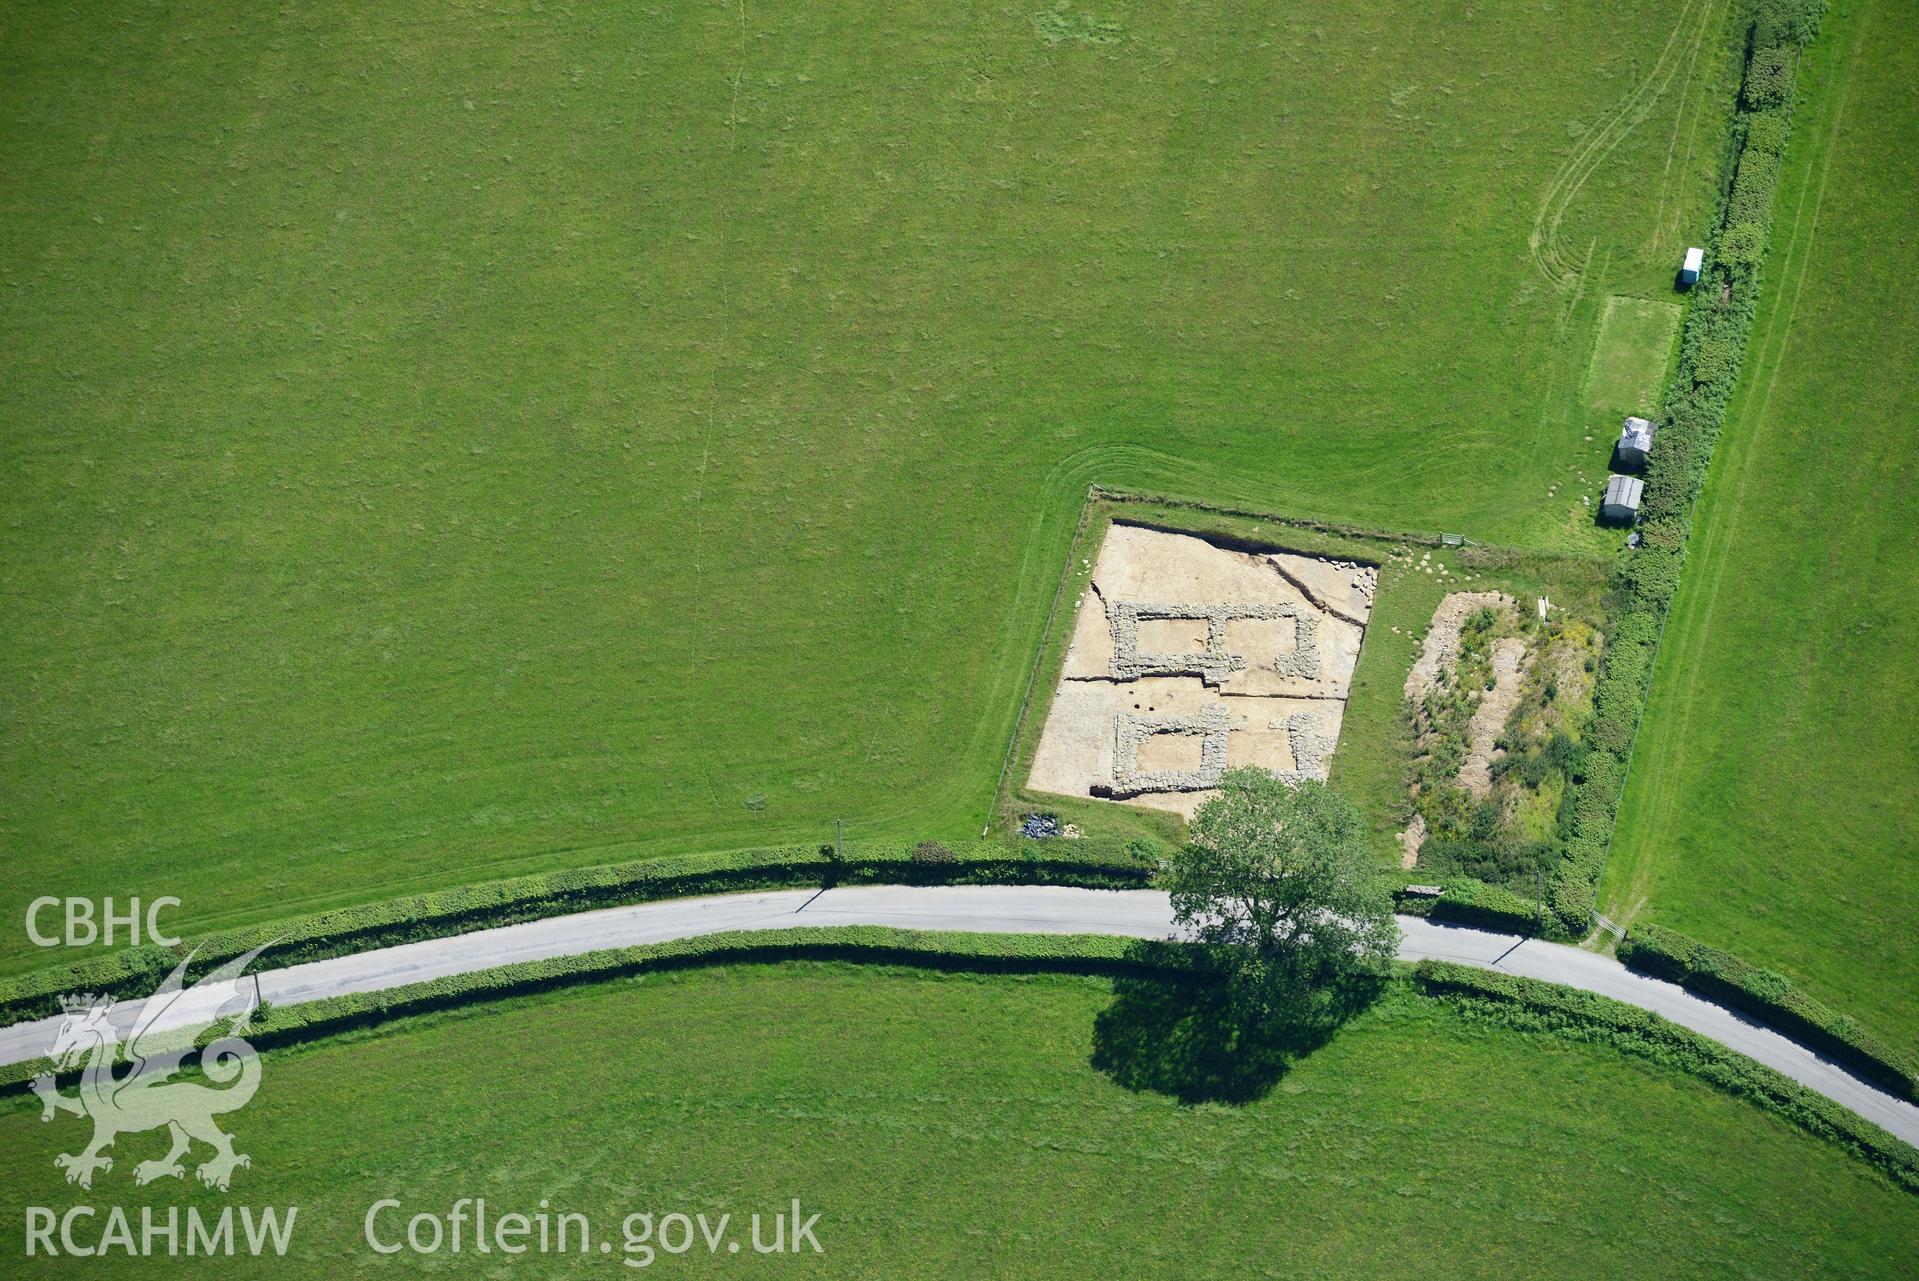 Gatehouse on the Strata Florida Abbey precinct, south of Pontrhydfendigaid, Aberystwyth. Oblique aerial photograph taken during the Royal Commission's programme of archaeological aerial reconnaissance by Toby Driver on 30th June 2015.